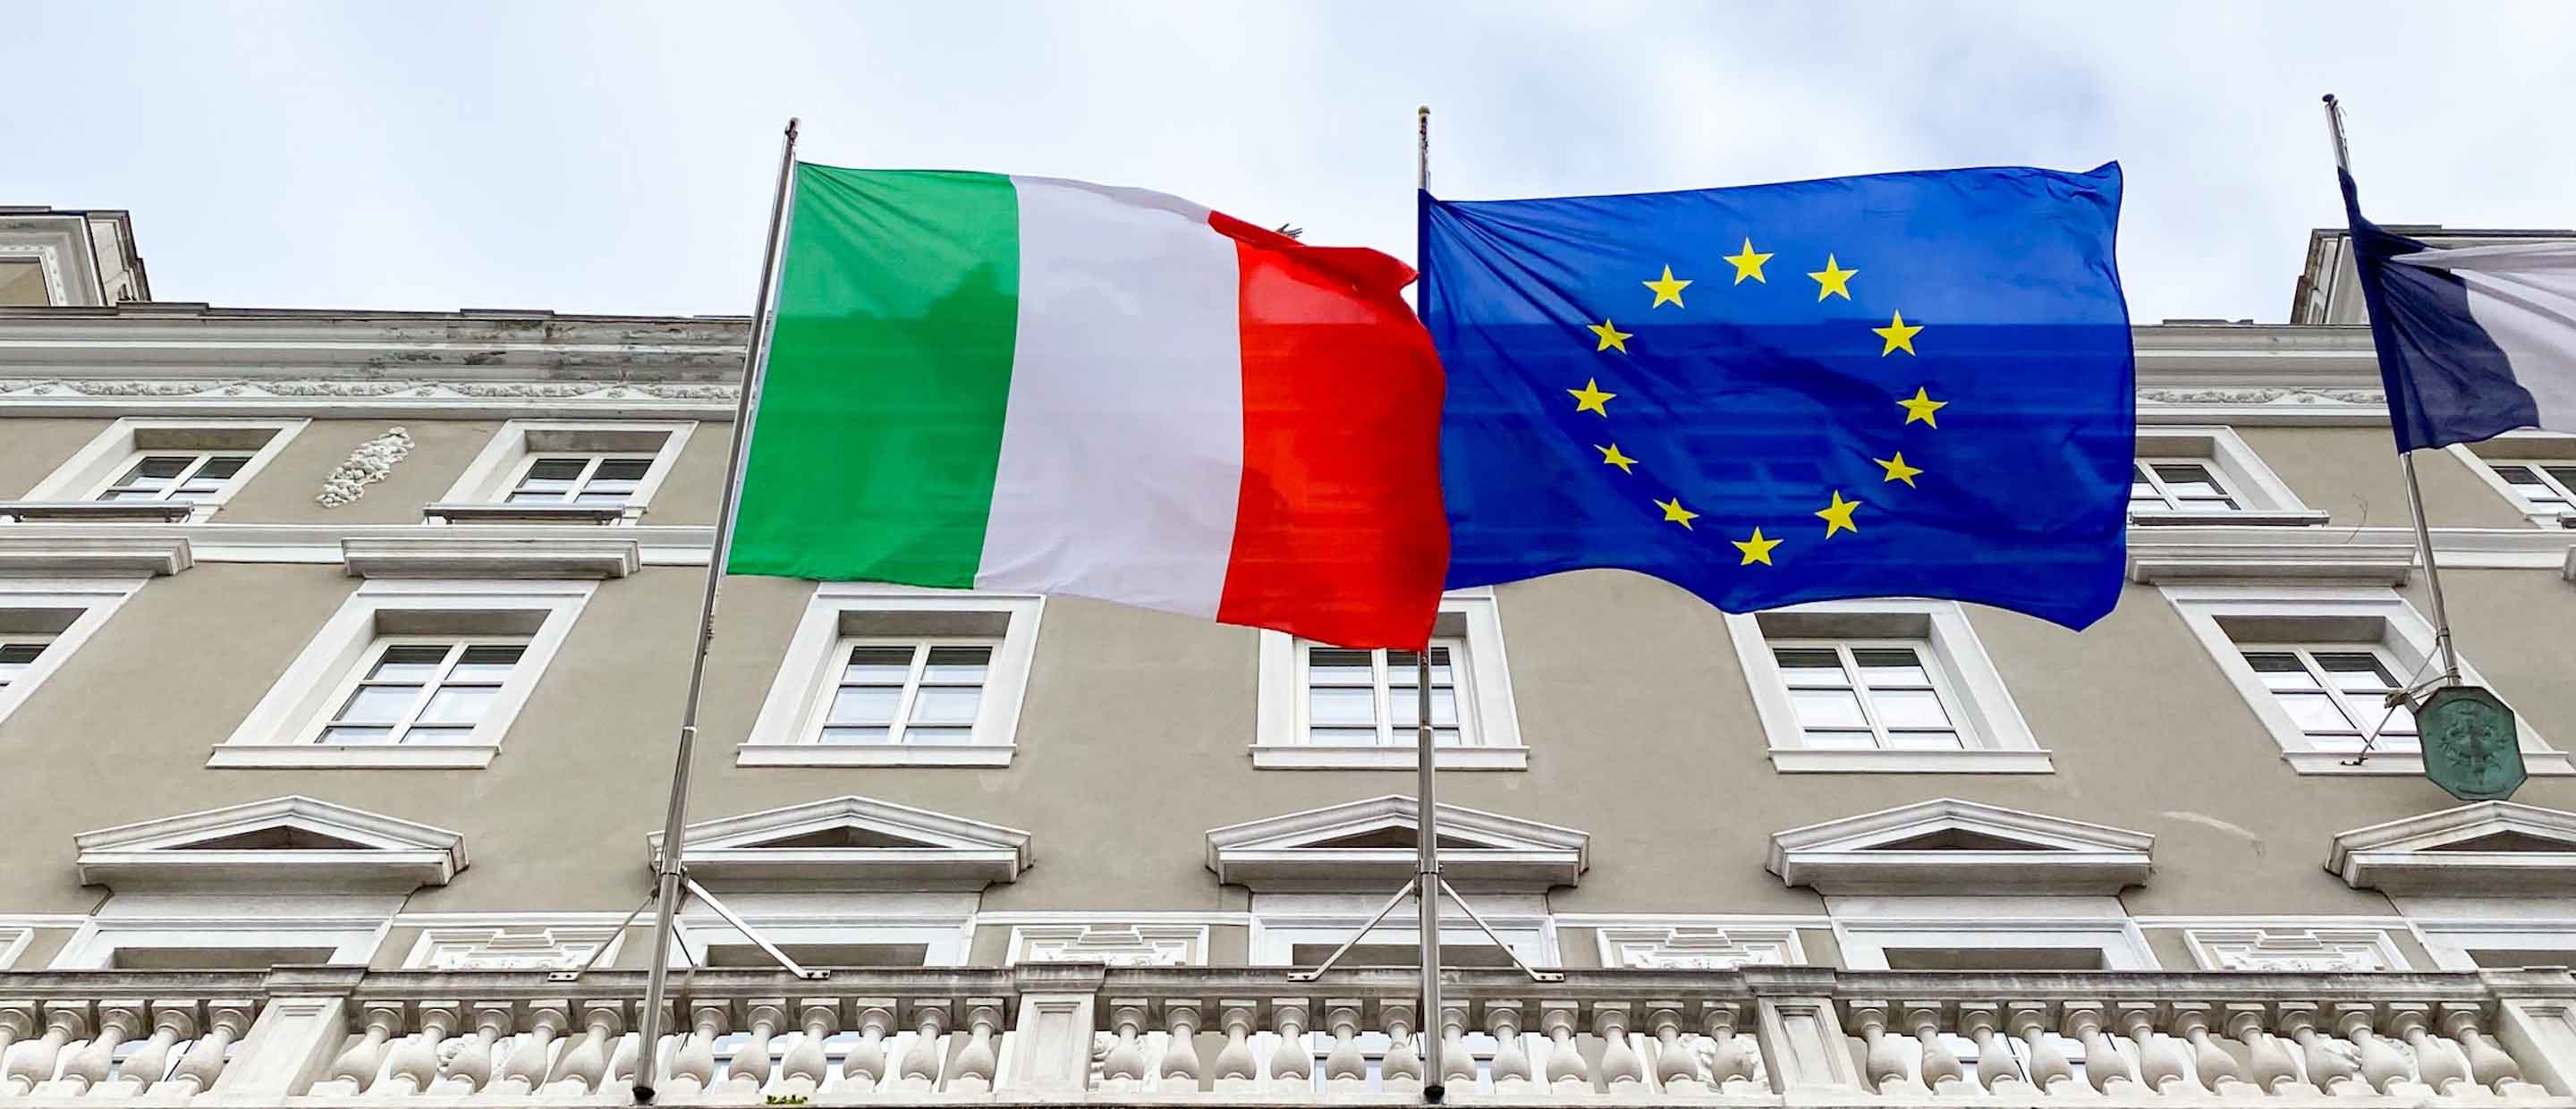 Italy: outlook still hinges on fiscal reforms | Deutsche wealth management services